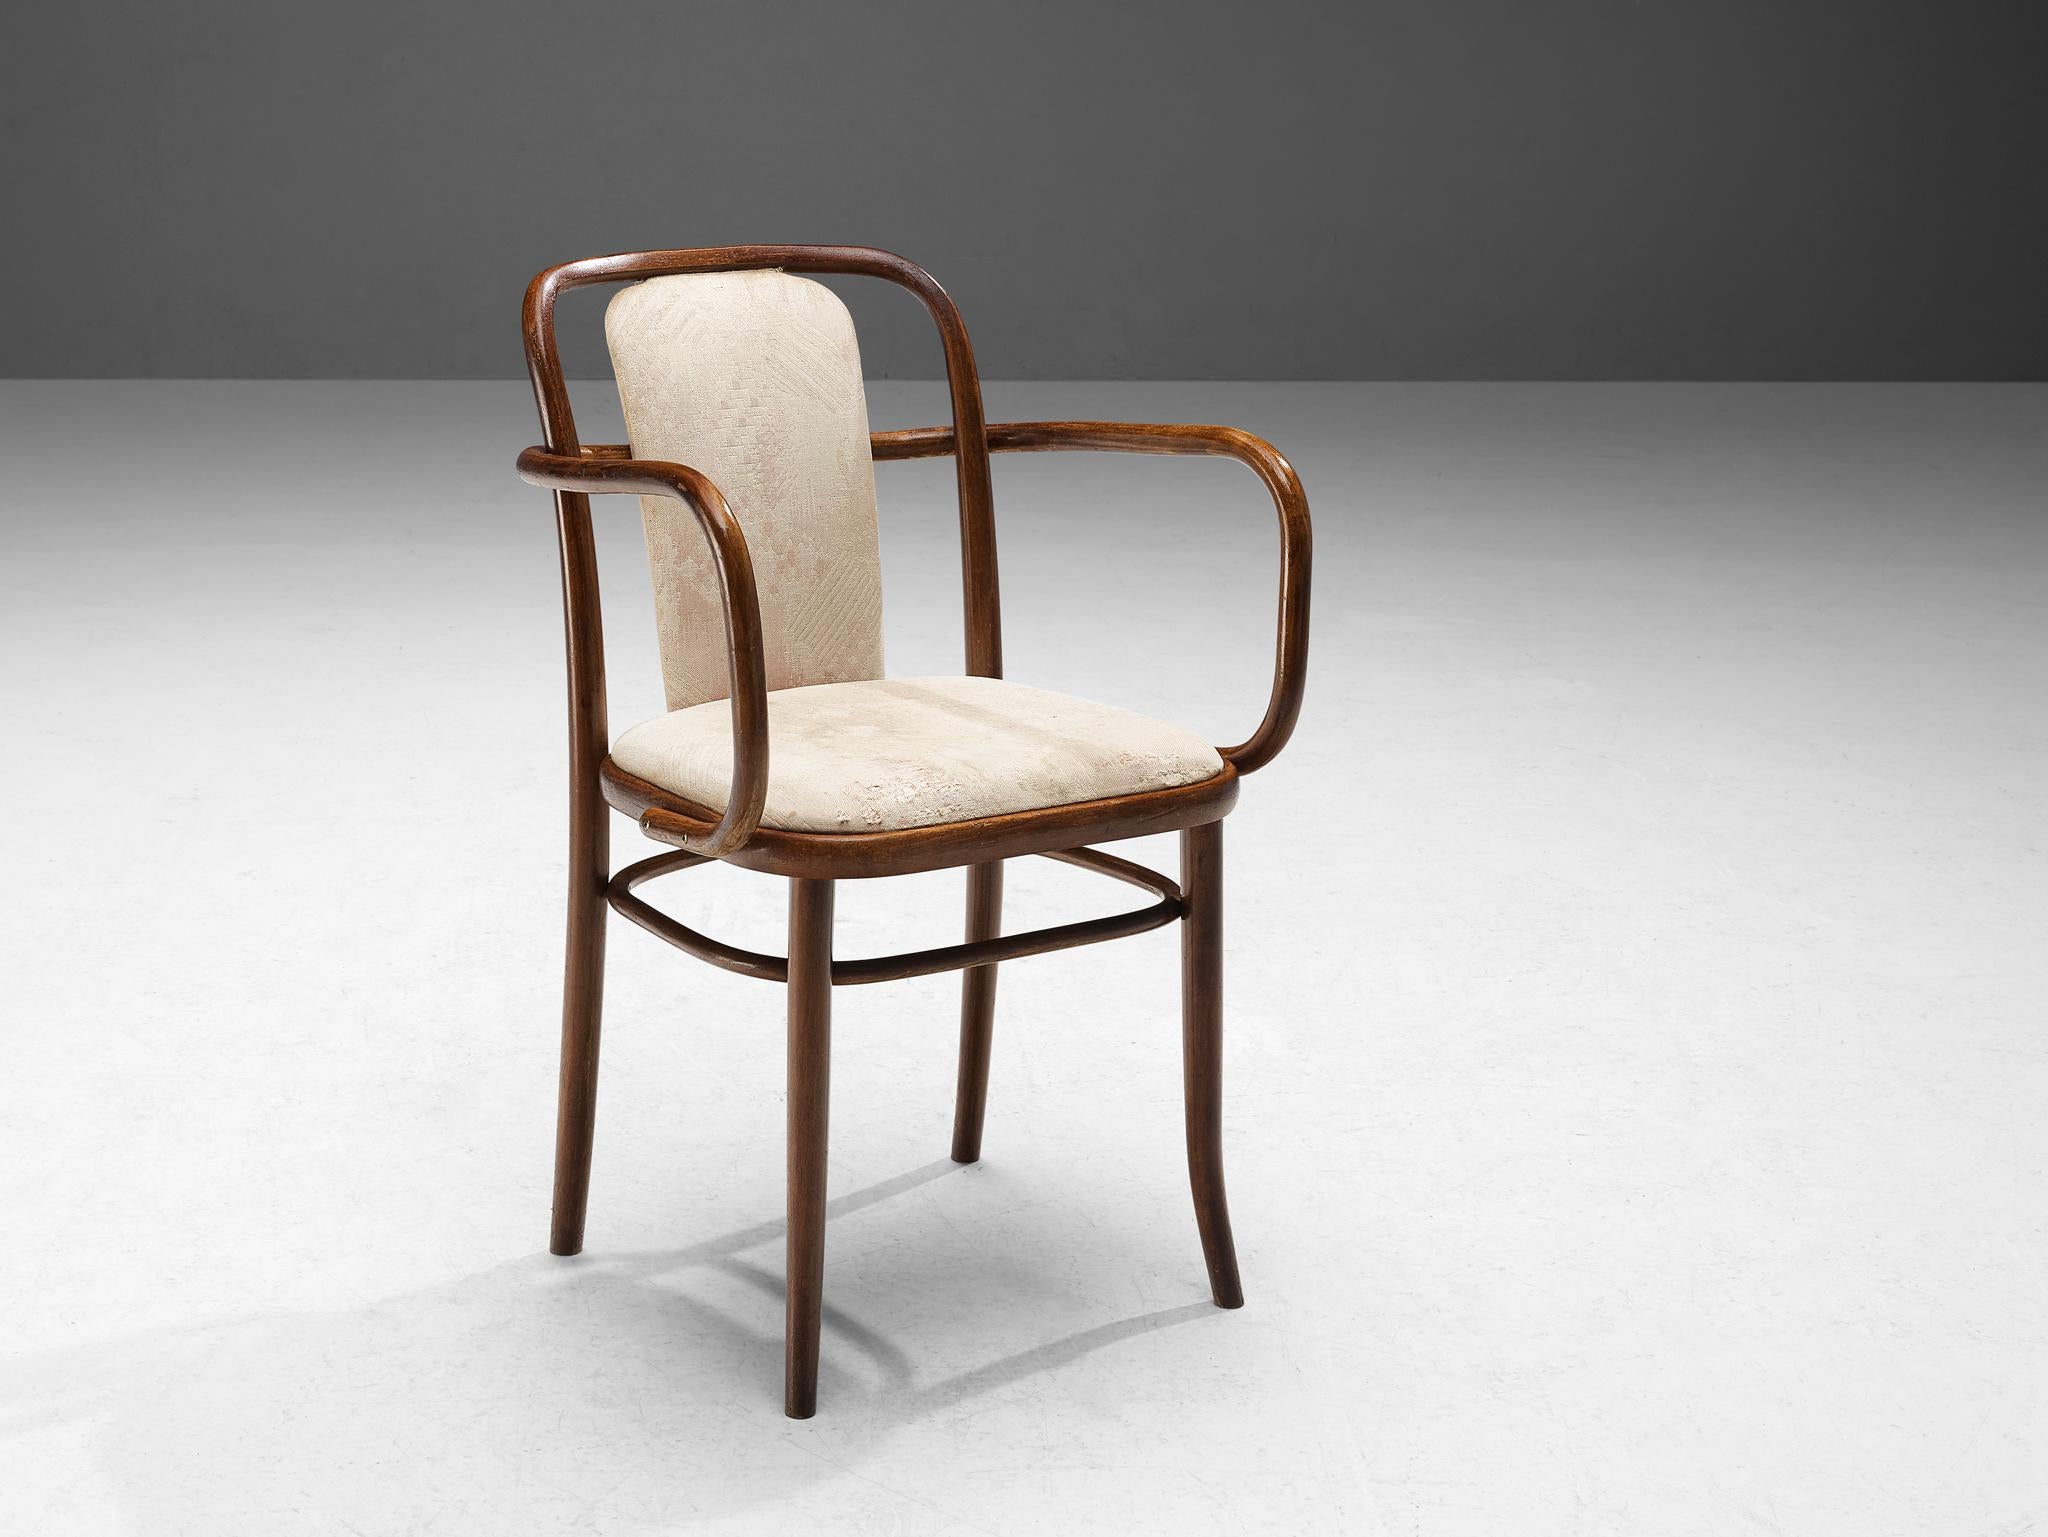 TON, armchair, bentwood, fabric, Czech Republic, 1930s.

Elegant dining chair made in bentwood. The lines and shapes are dynamic but in a soft sense, the light color of the backrest and seating area also add to this serene appearance. This